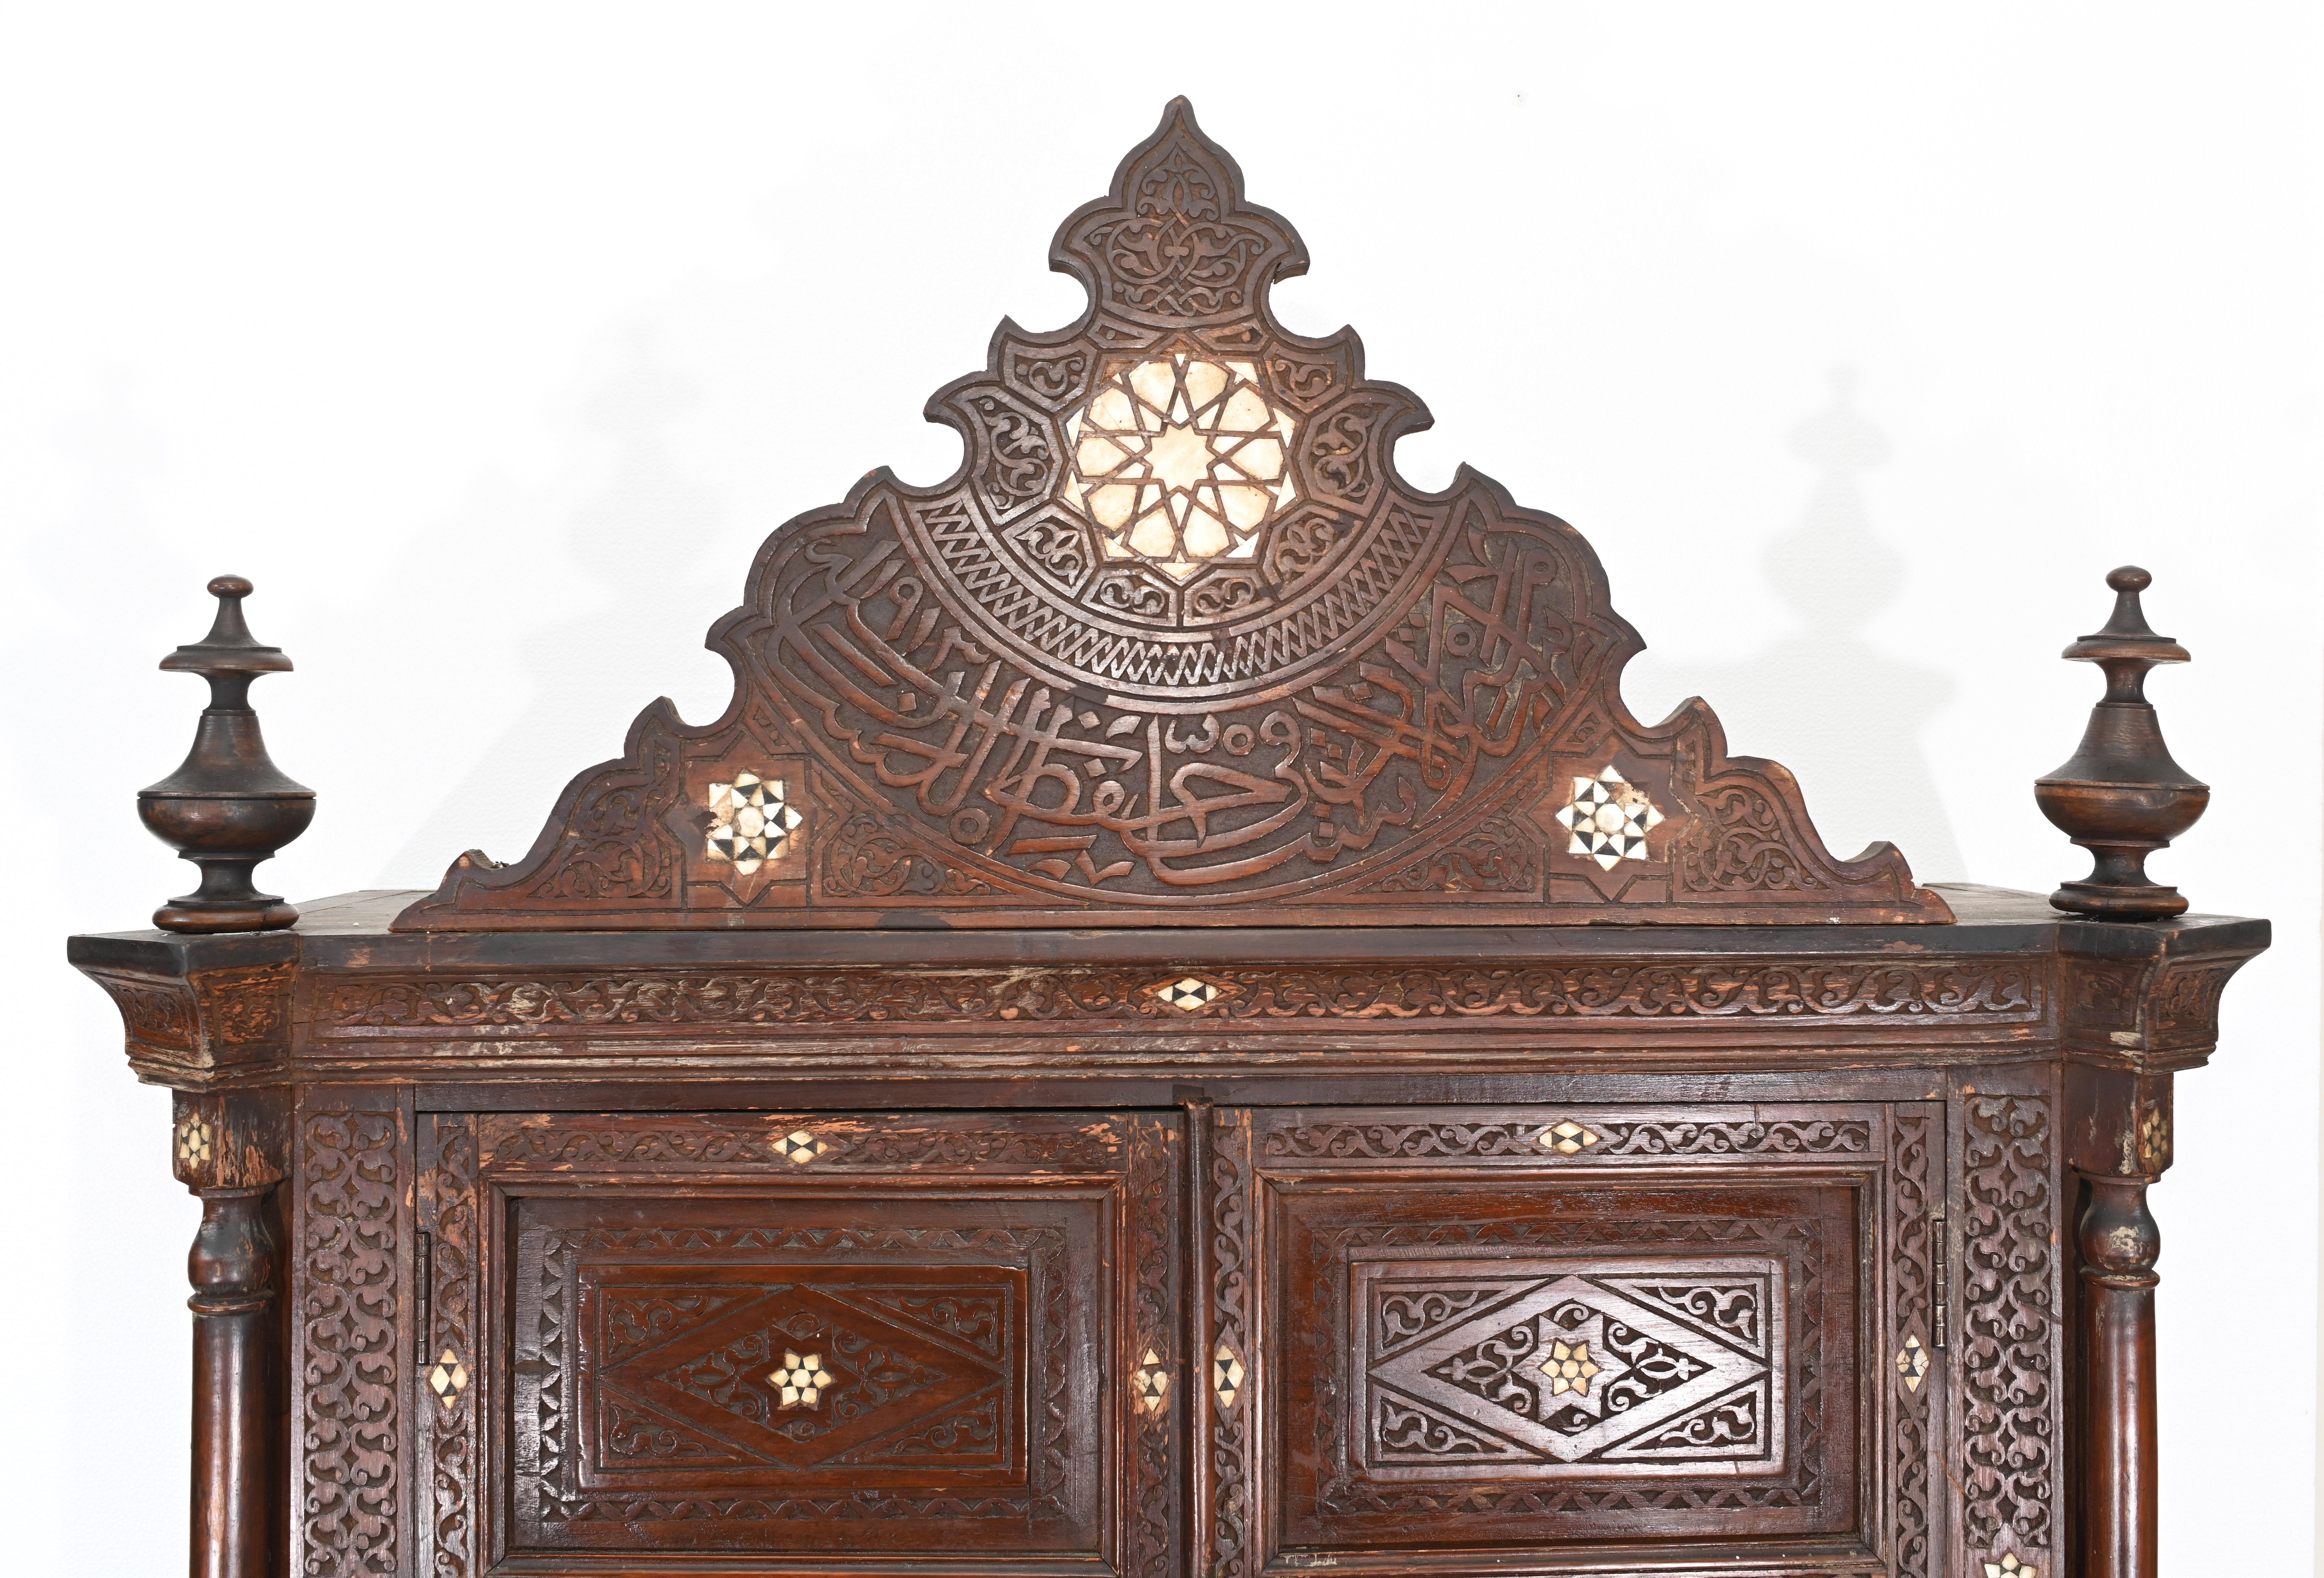 Late 19th Century Syrian Inlay Cabinet Bookcase Damascan Islamic Interiors, 1880